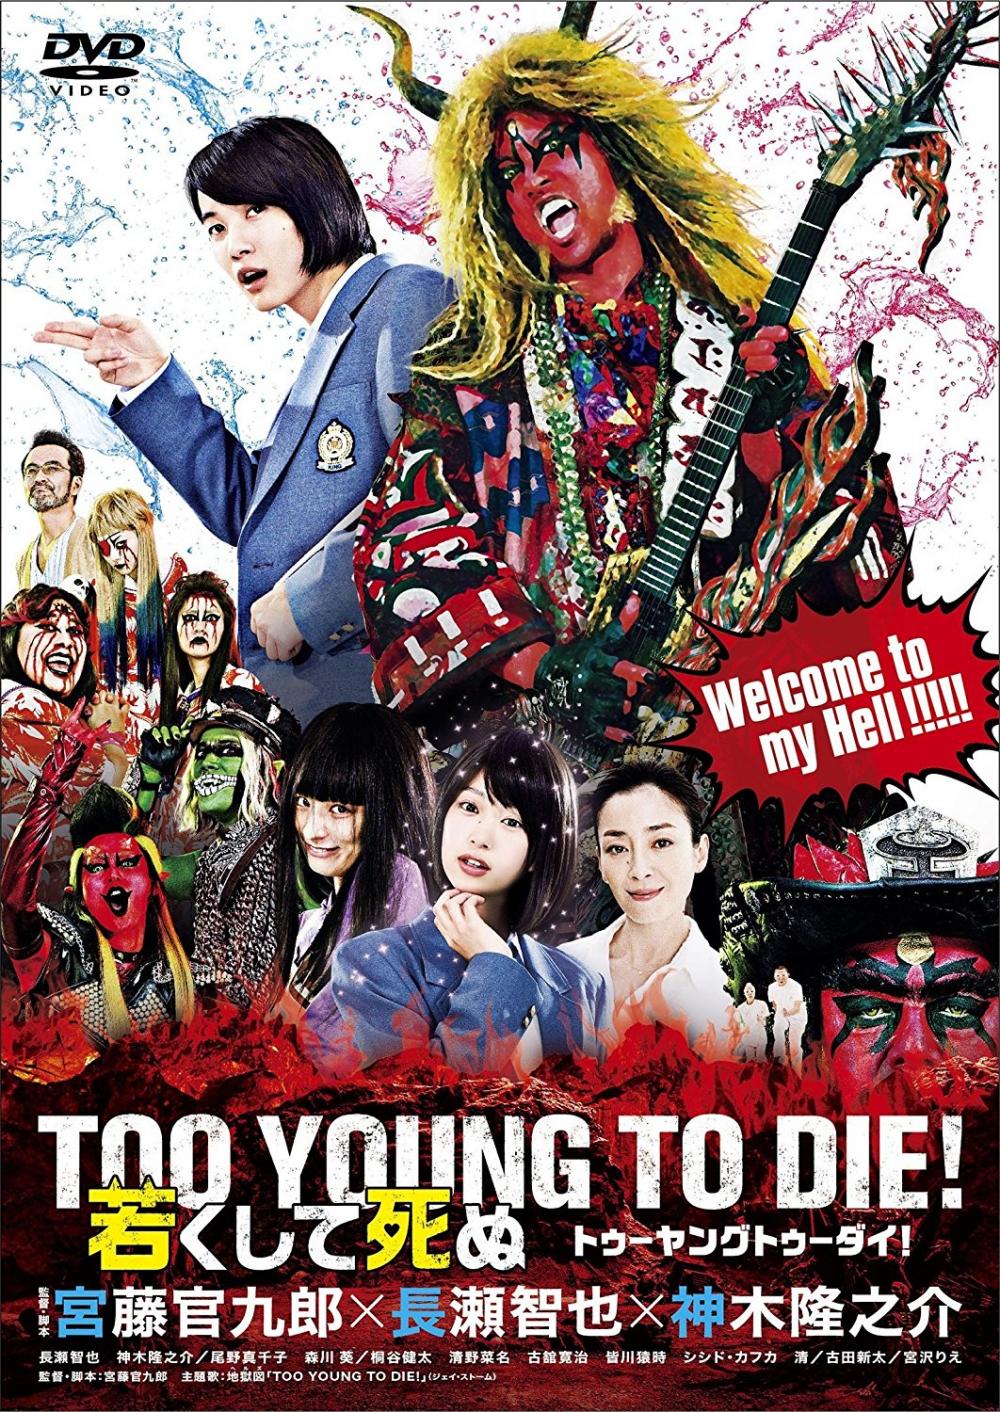 『TOO YOUNG TO DIE! 若くして死ぬ』